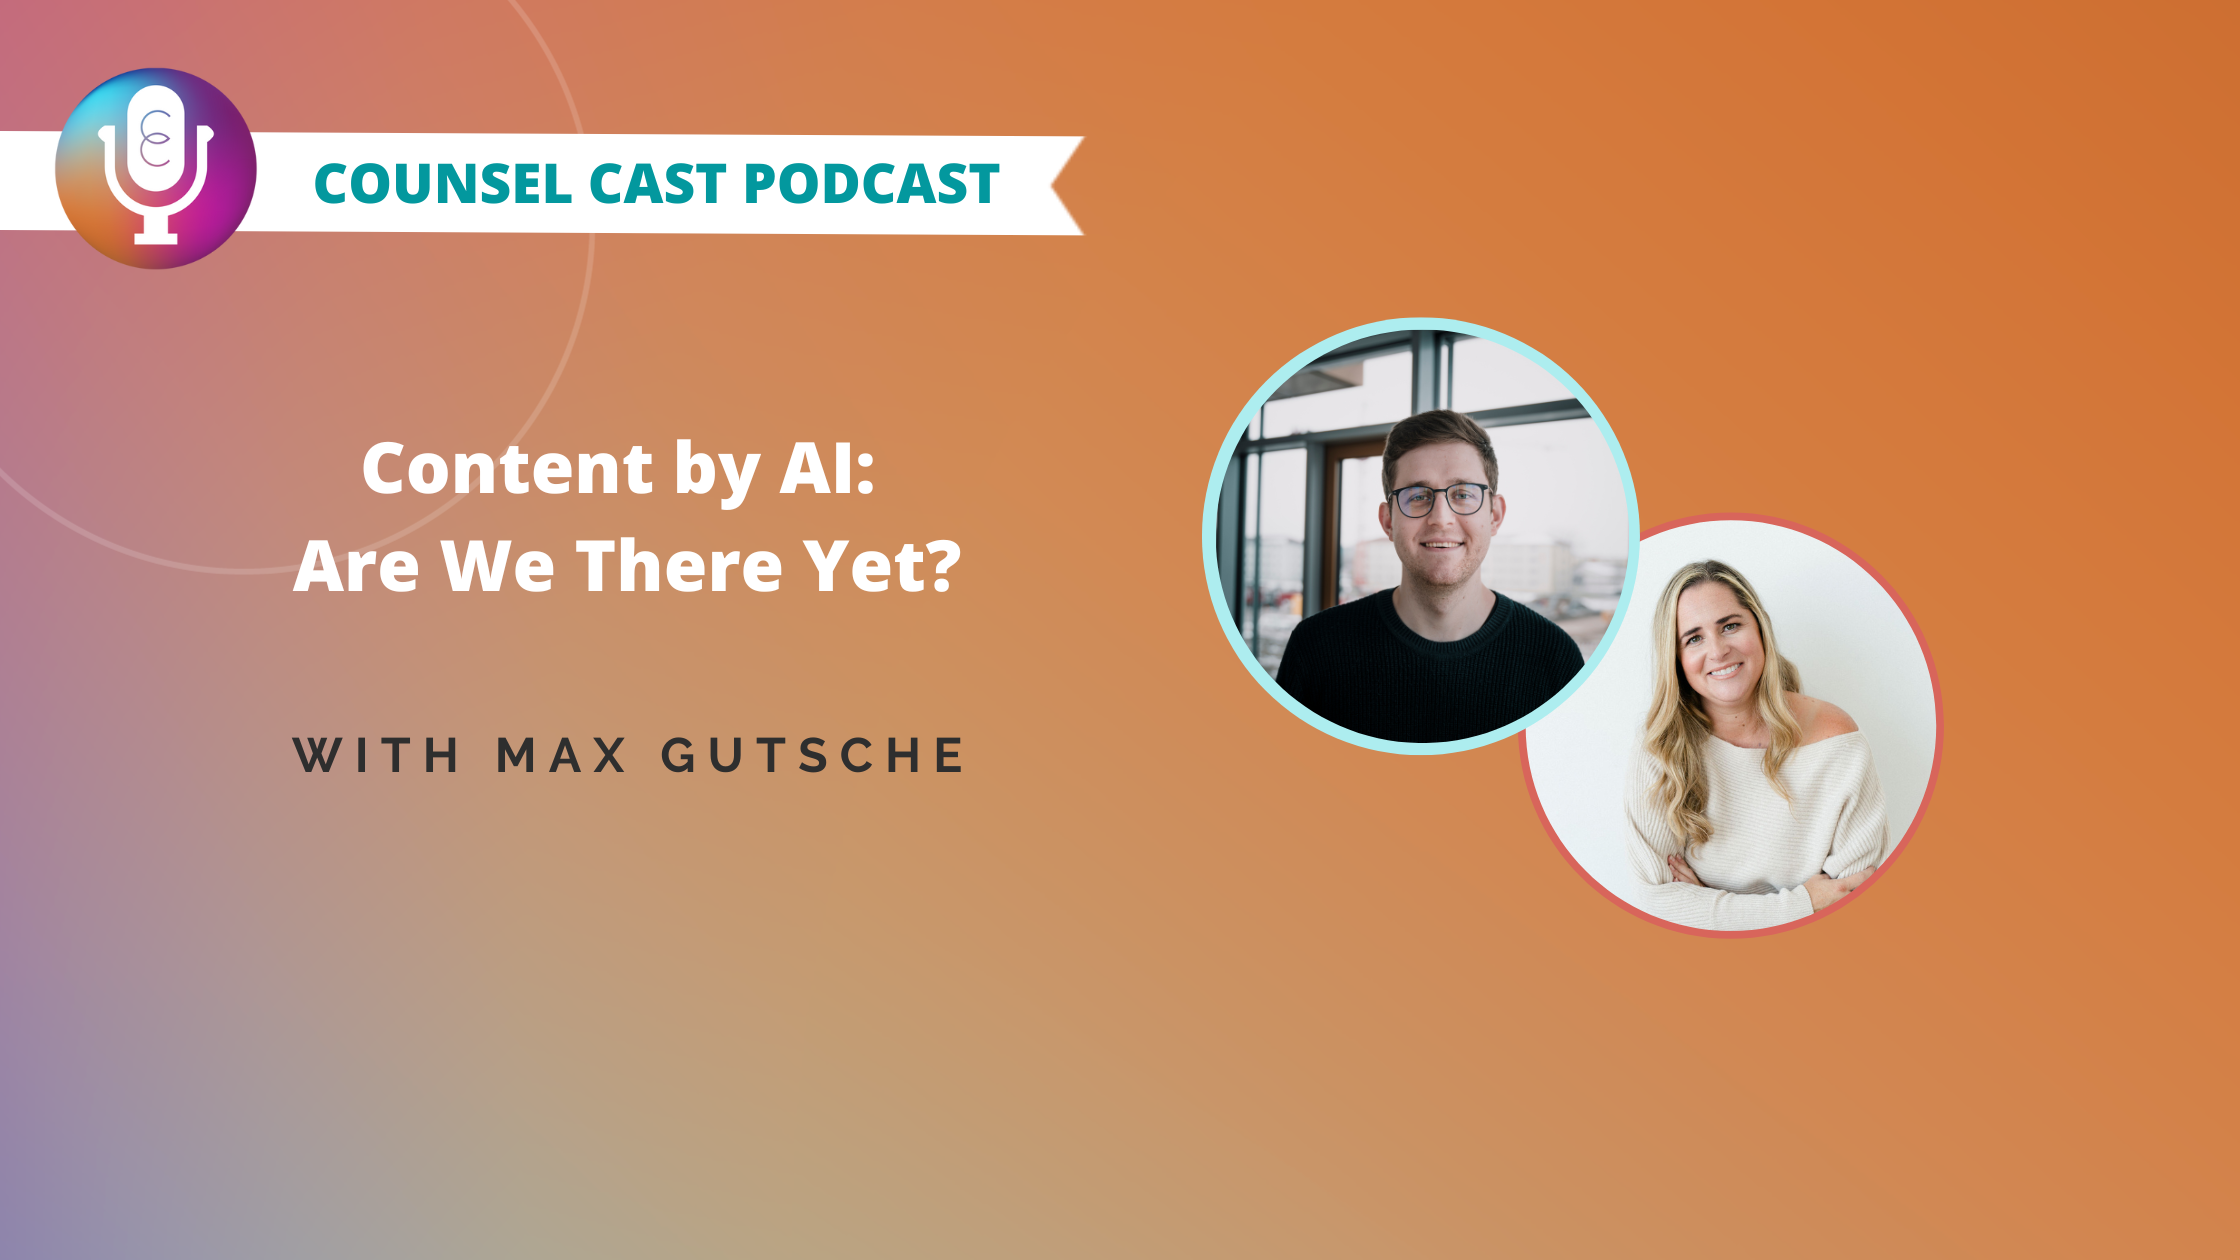 Content by AI: Are We There Yet? with Max Gutsche